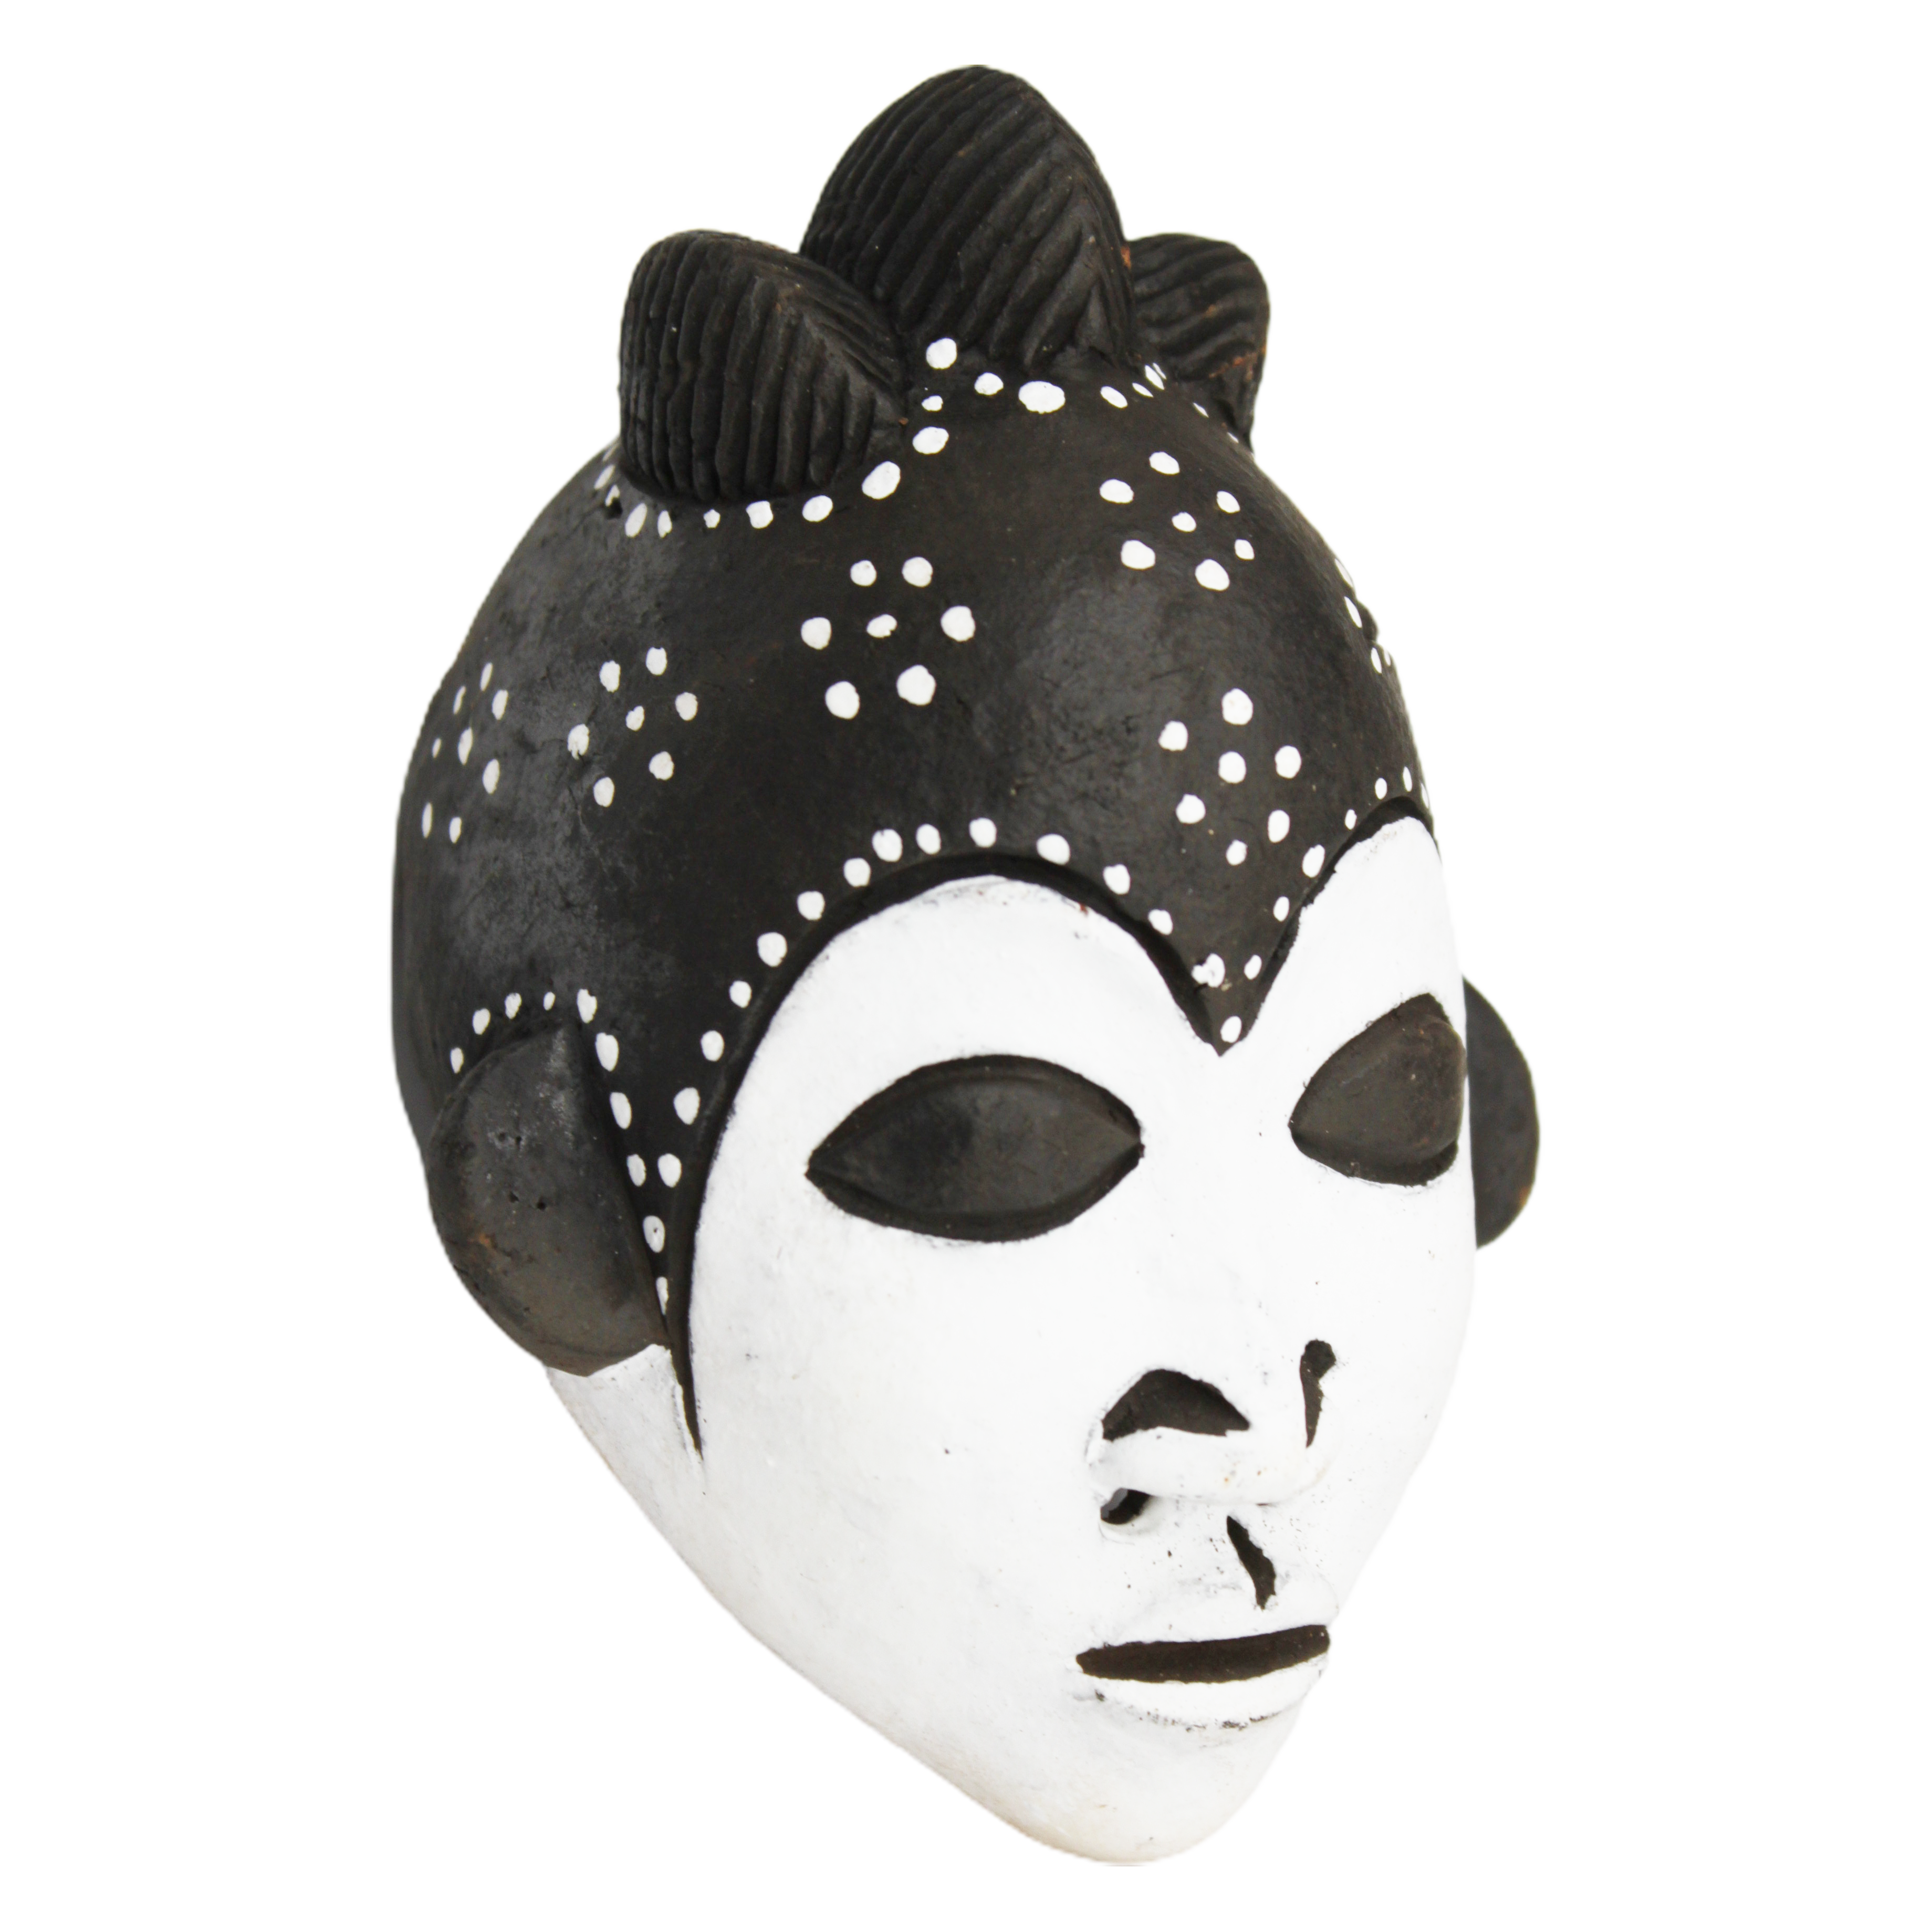 African Passport Mask Stand - Grey – Accent Touch